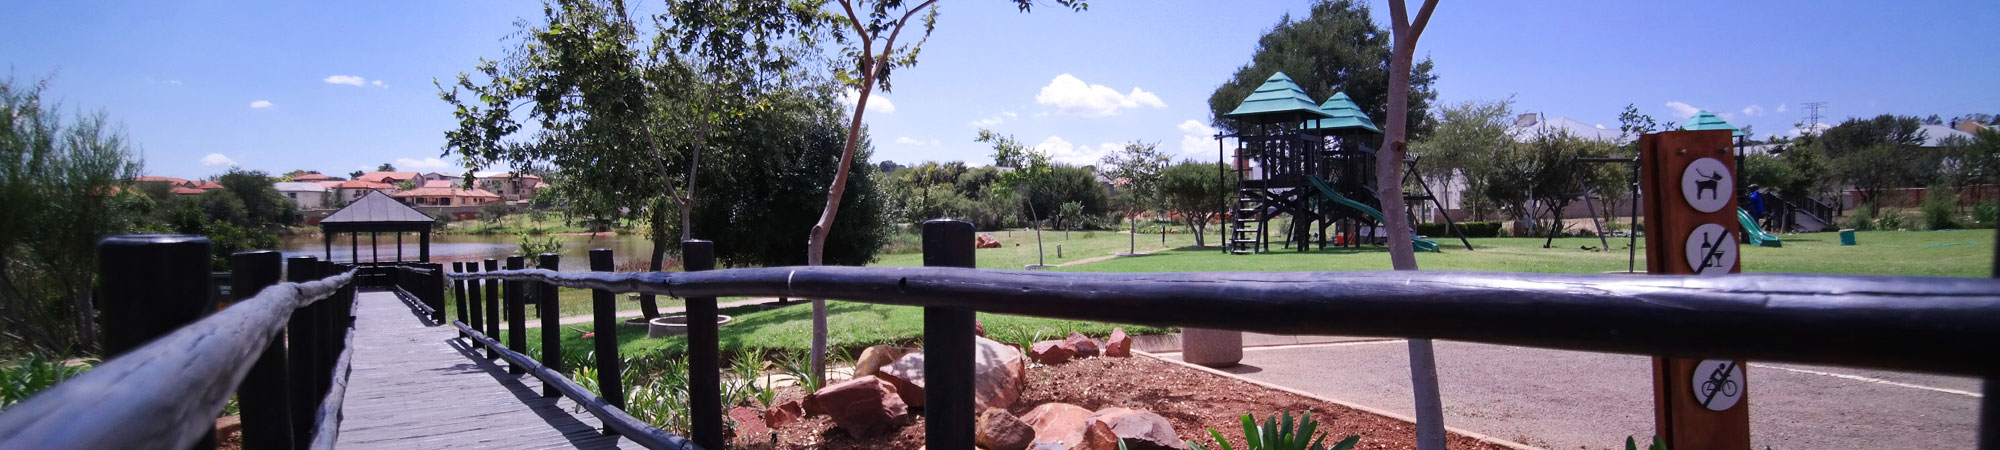 The estate was proclaimed in January 2002 as a full title and sectional title development comprising 494 landowners made up of 247 full title stands and 8 sectional title developments which comprise 247 upmarket sectional title units. The property was originally portion 95 of the Farm Tweefontein 372-JR. and is situated on the eastern most border of Pretoria. The original farm house, which forms part of the many photographs included in this web site, has been converted to the Gallery clubhouse.